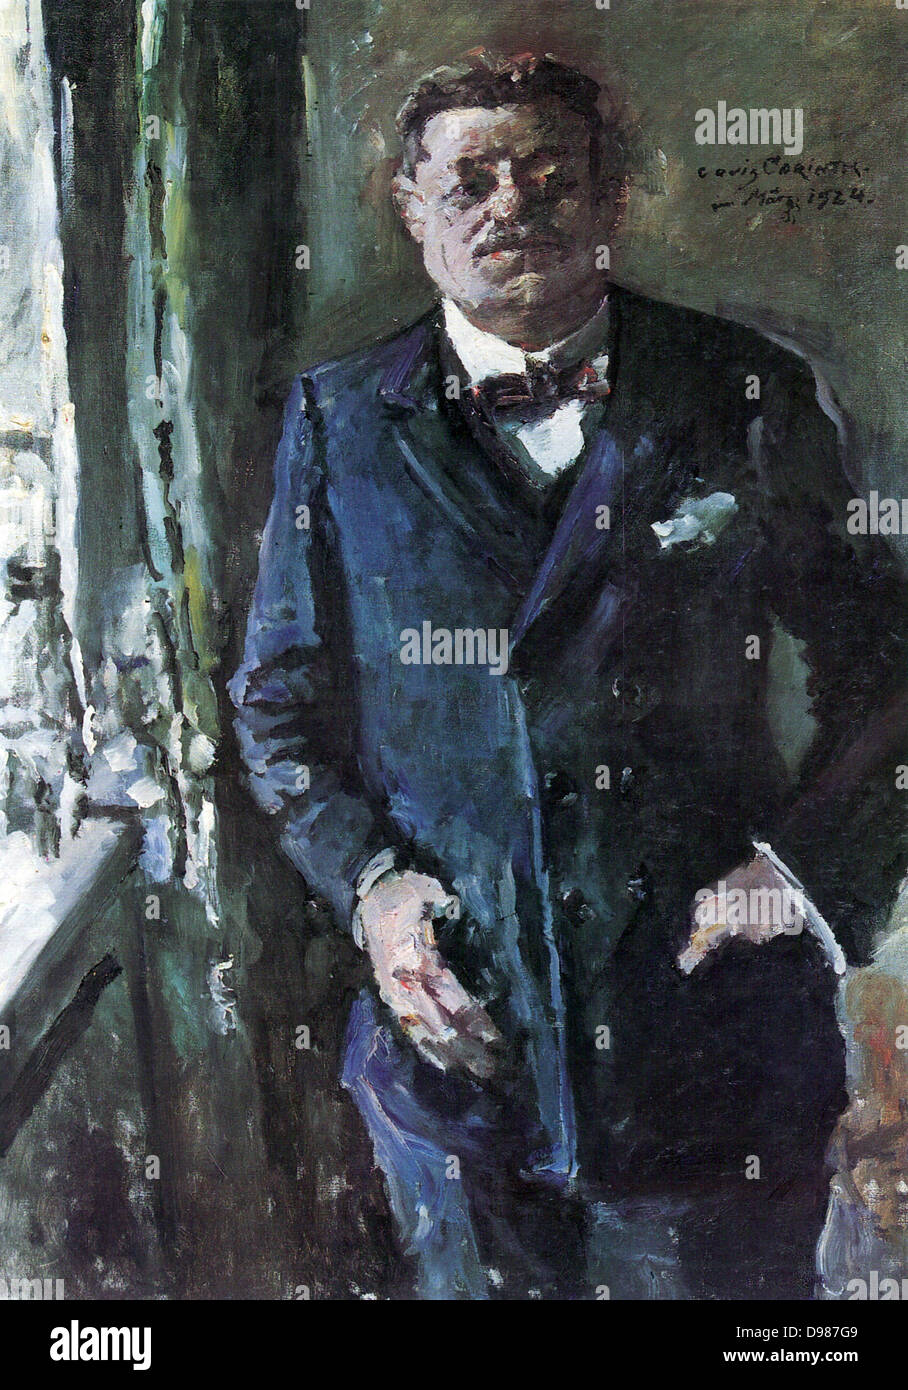 Friedrich Ebert (1871– 925) German politician (SPD). Served as Chancellor of Germany and its first President during the Weimar period. Painted by Lovis Corinth (1858-1925), 1924. Stock Photo